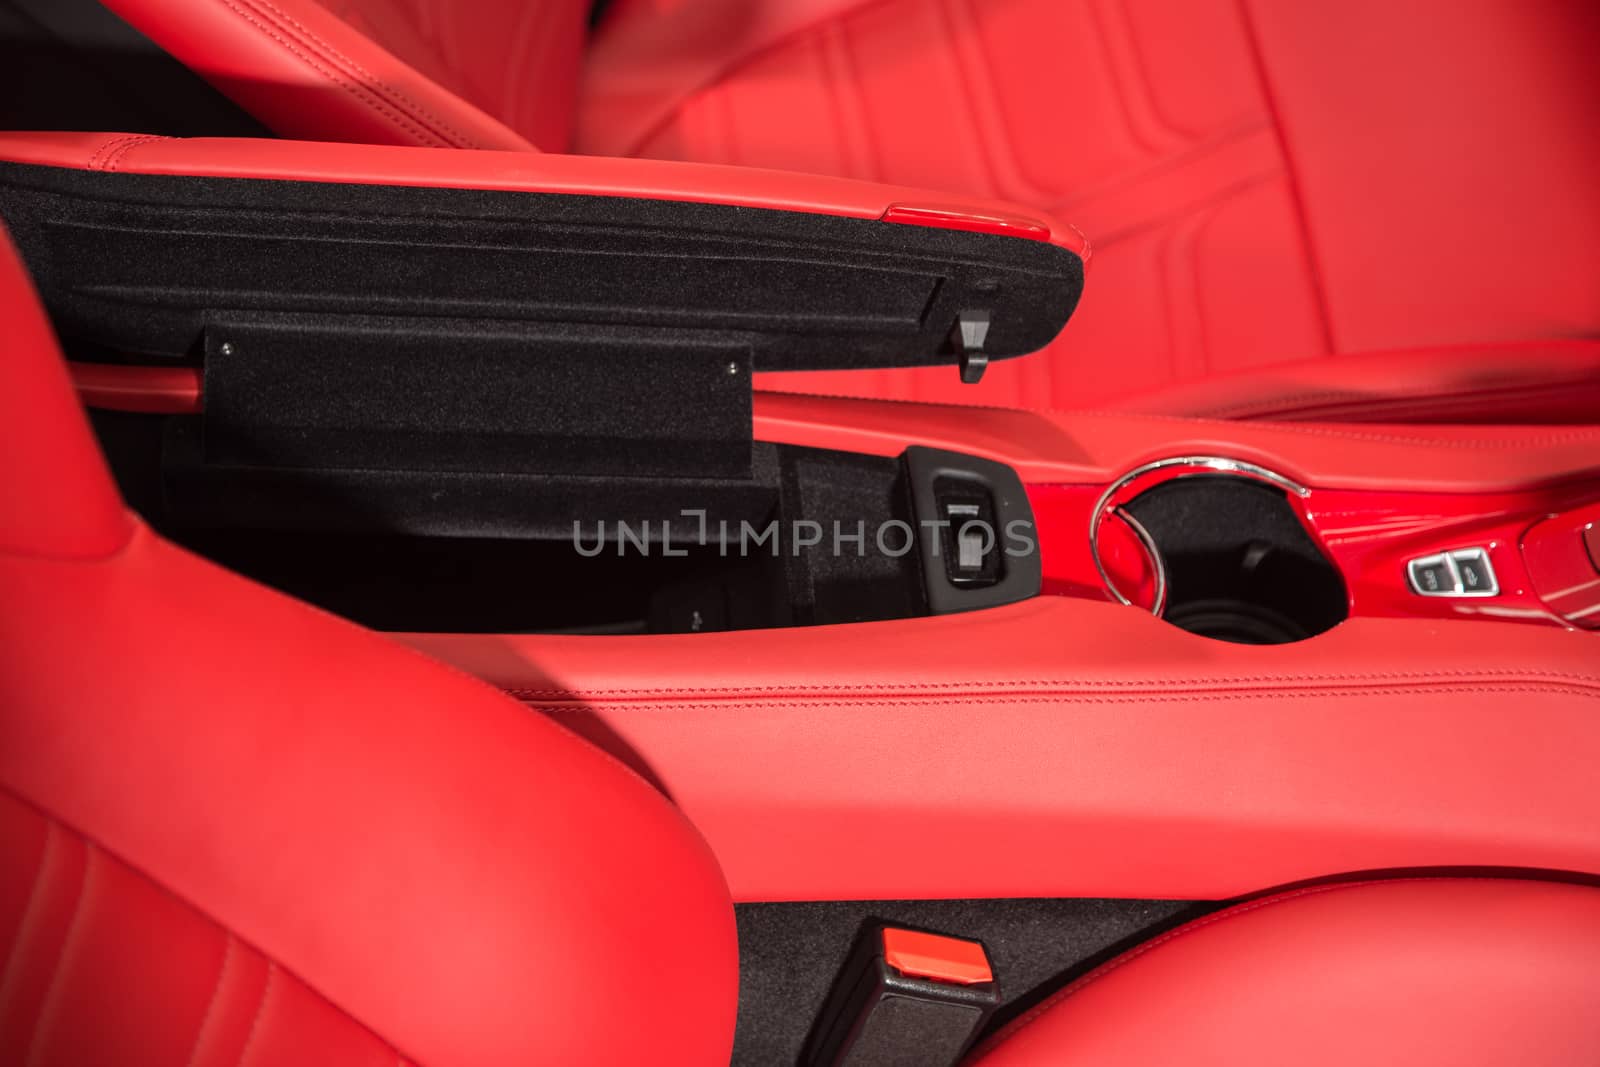 Storage compartment of luxury car interior by camerarules